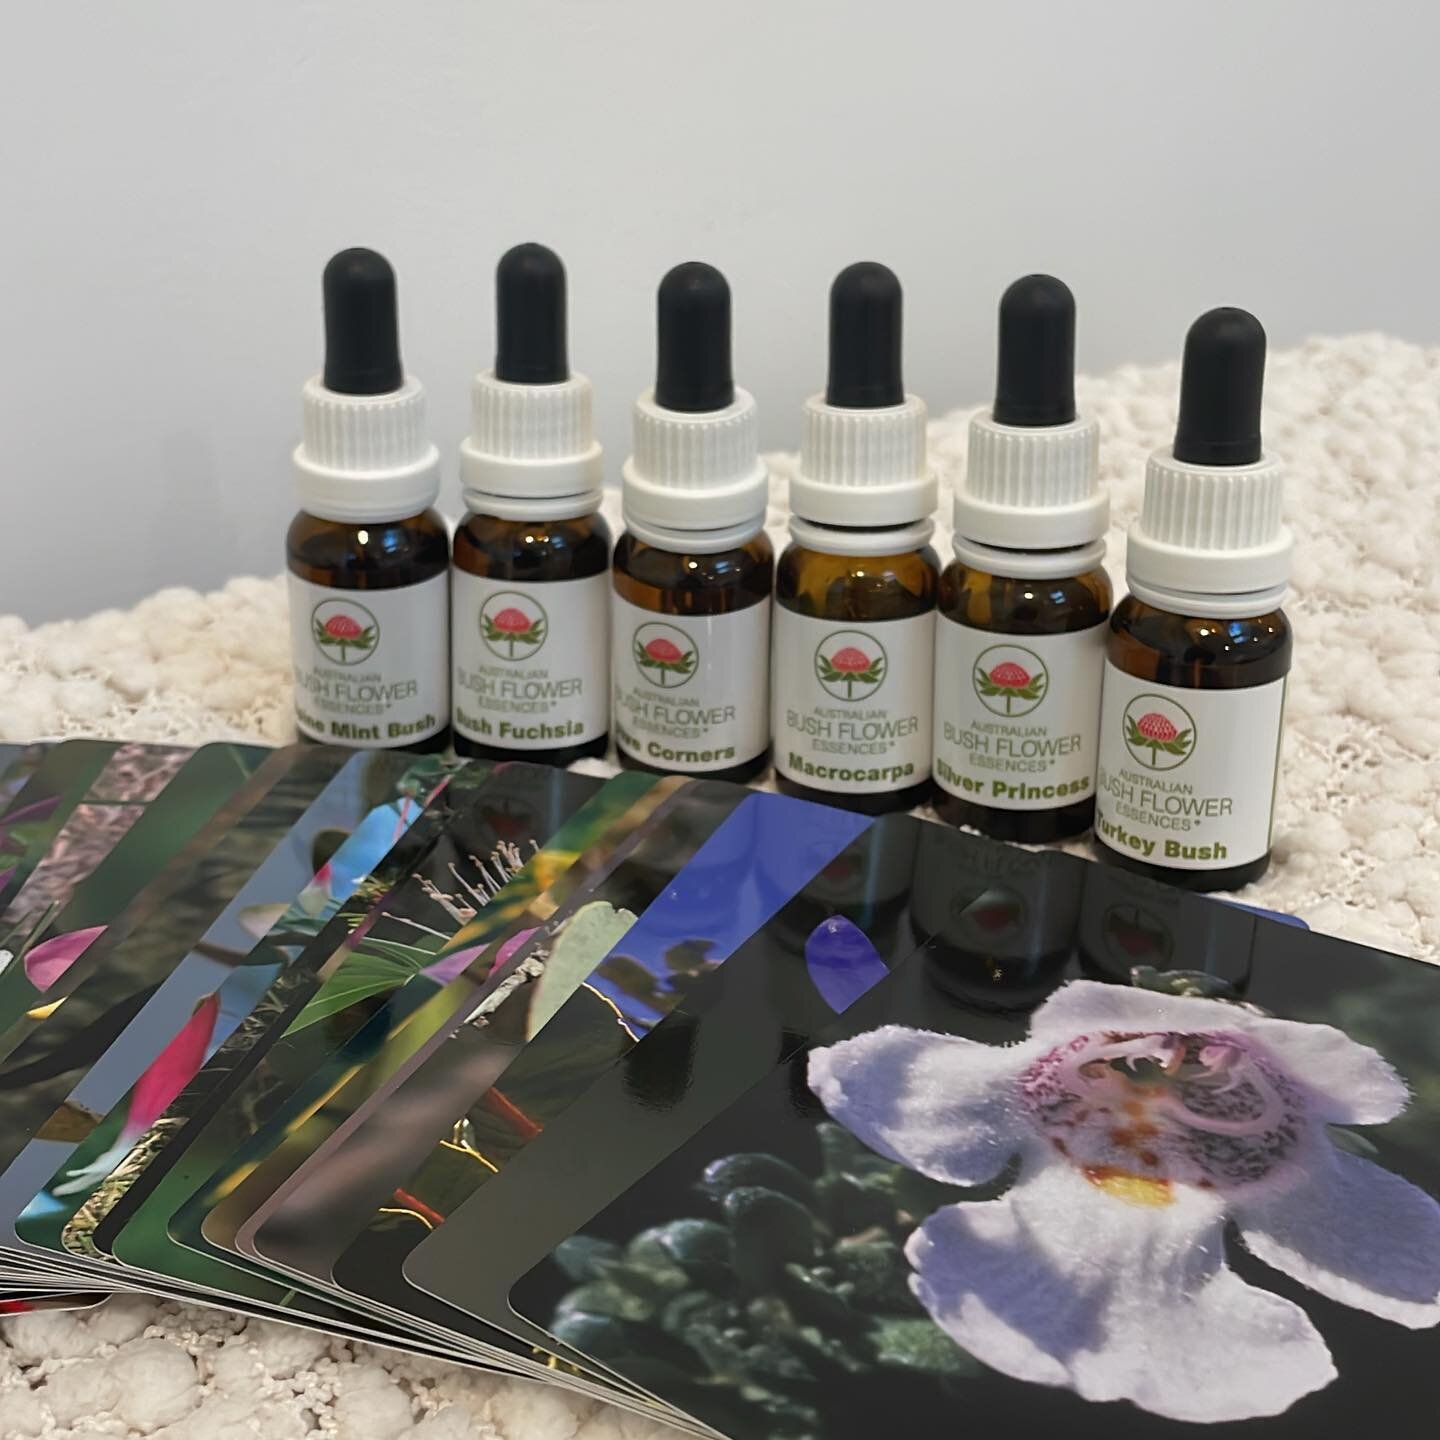 🌺Australian Bush Flower essences 🌺help balance emotions 🌺contact me to find out how they work 🌺contact me if you want a remedy made up just for you #etre #wellbeing #flower #australianbushfloweressences #emotions #life #health